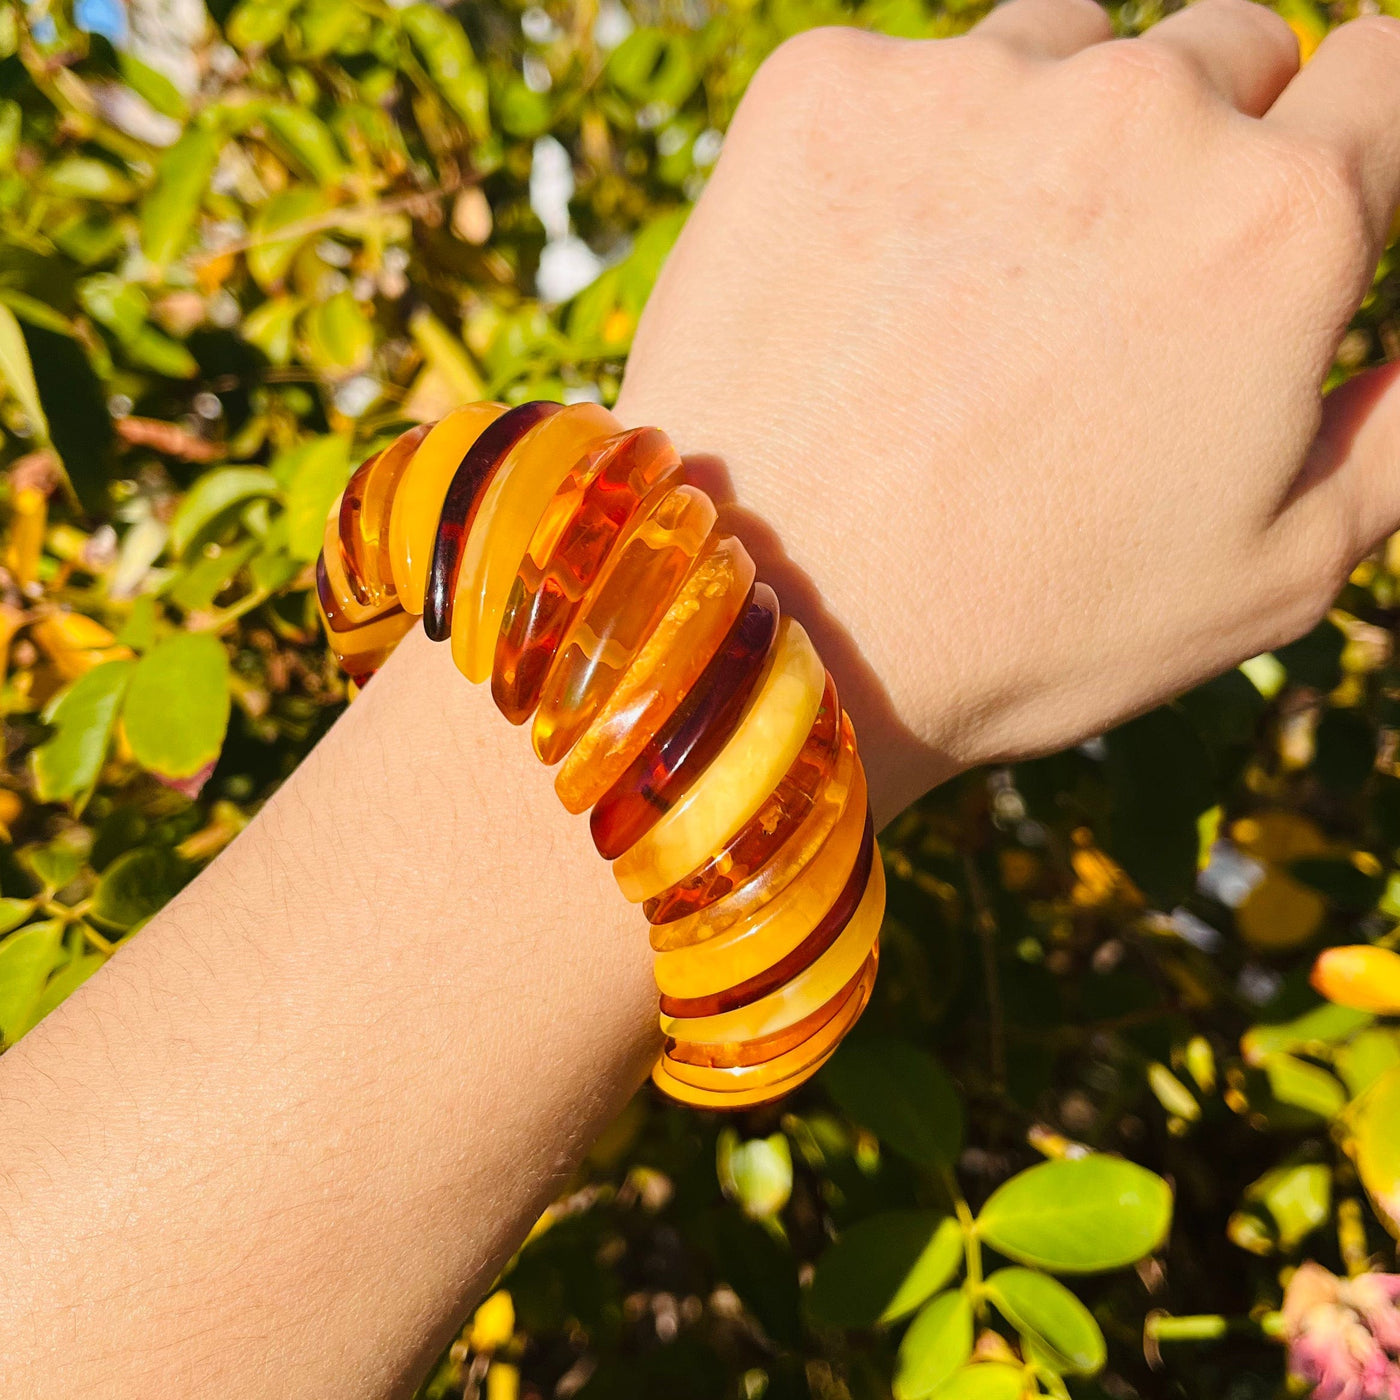 Frontal view of Baltic Amber Bracelet, worn on woman's wrist.